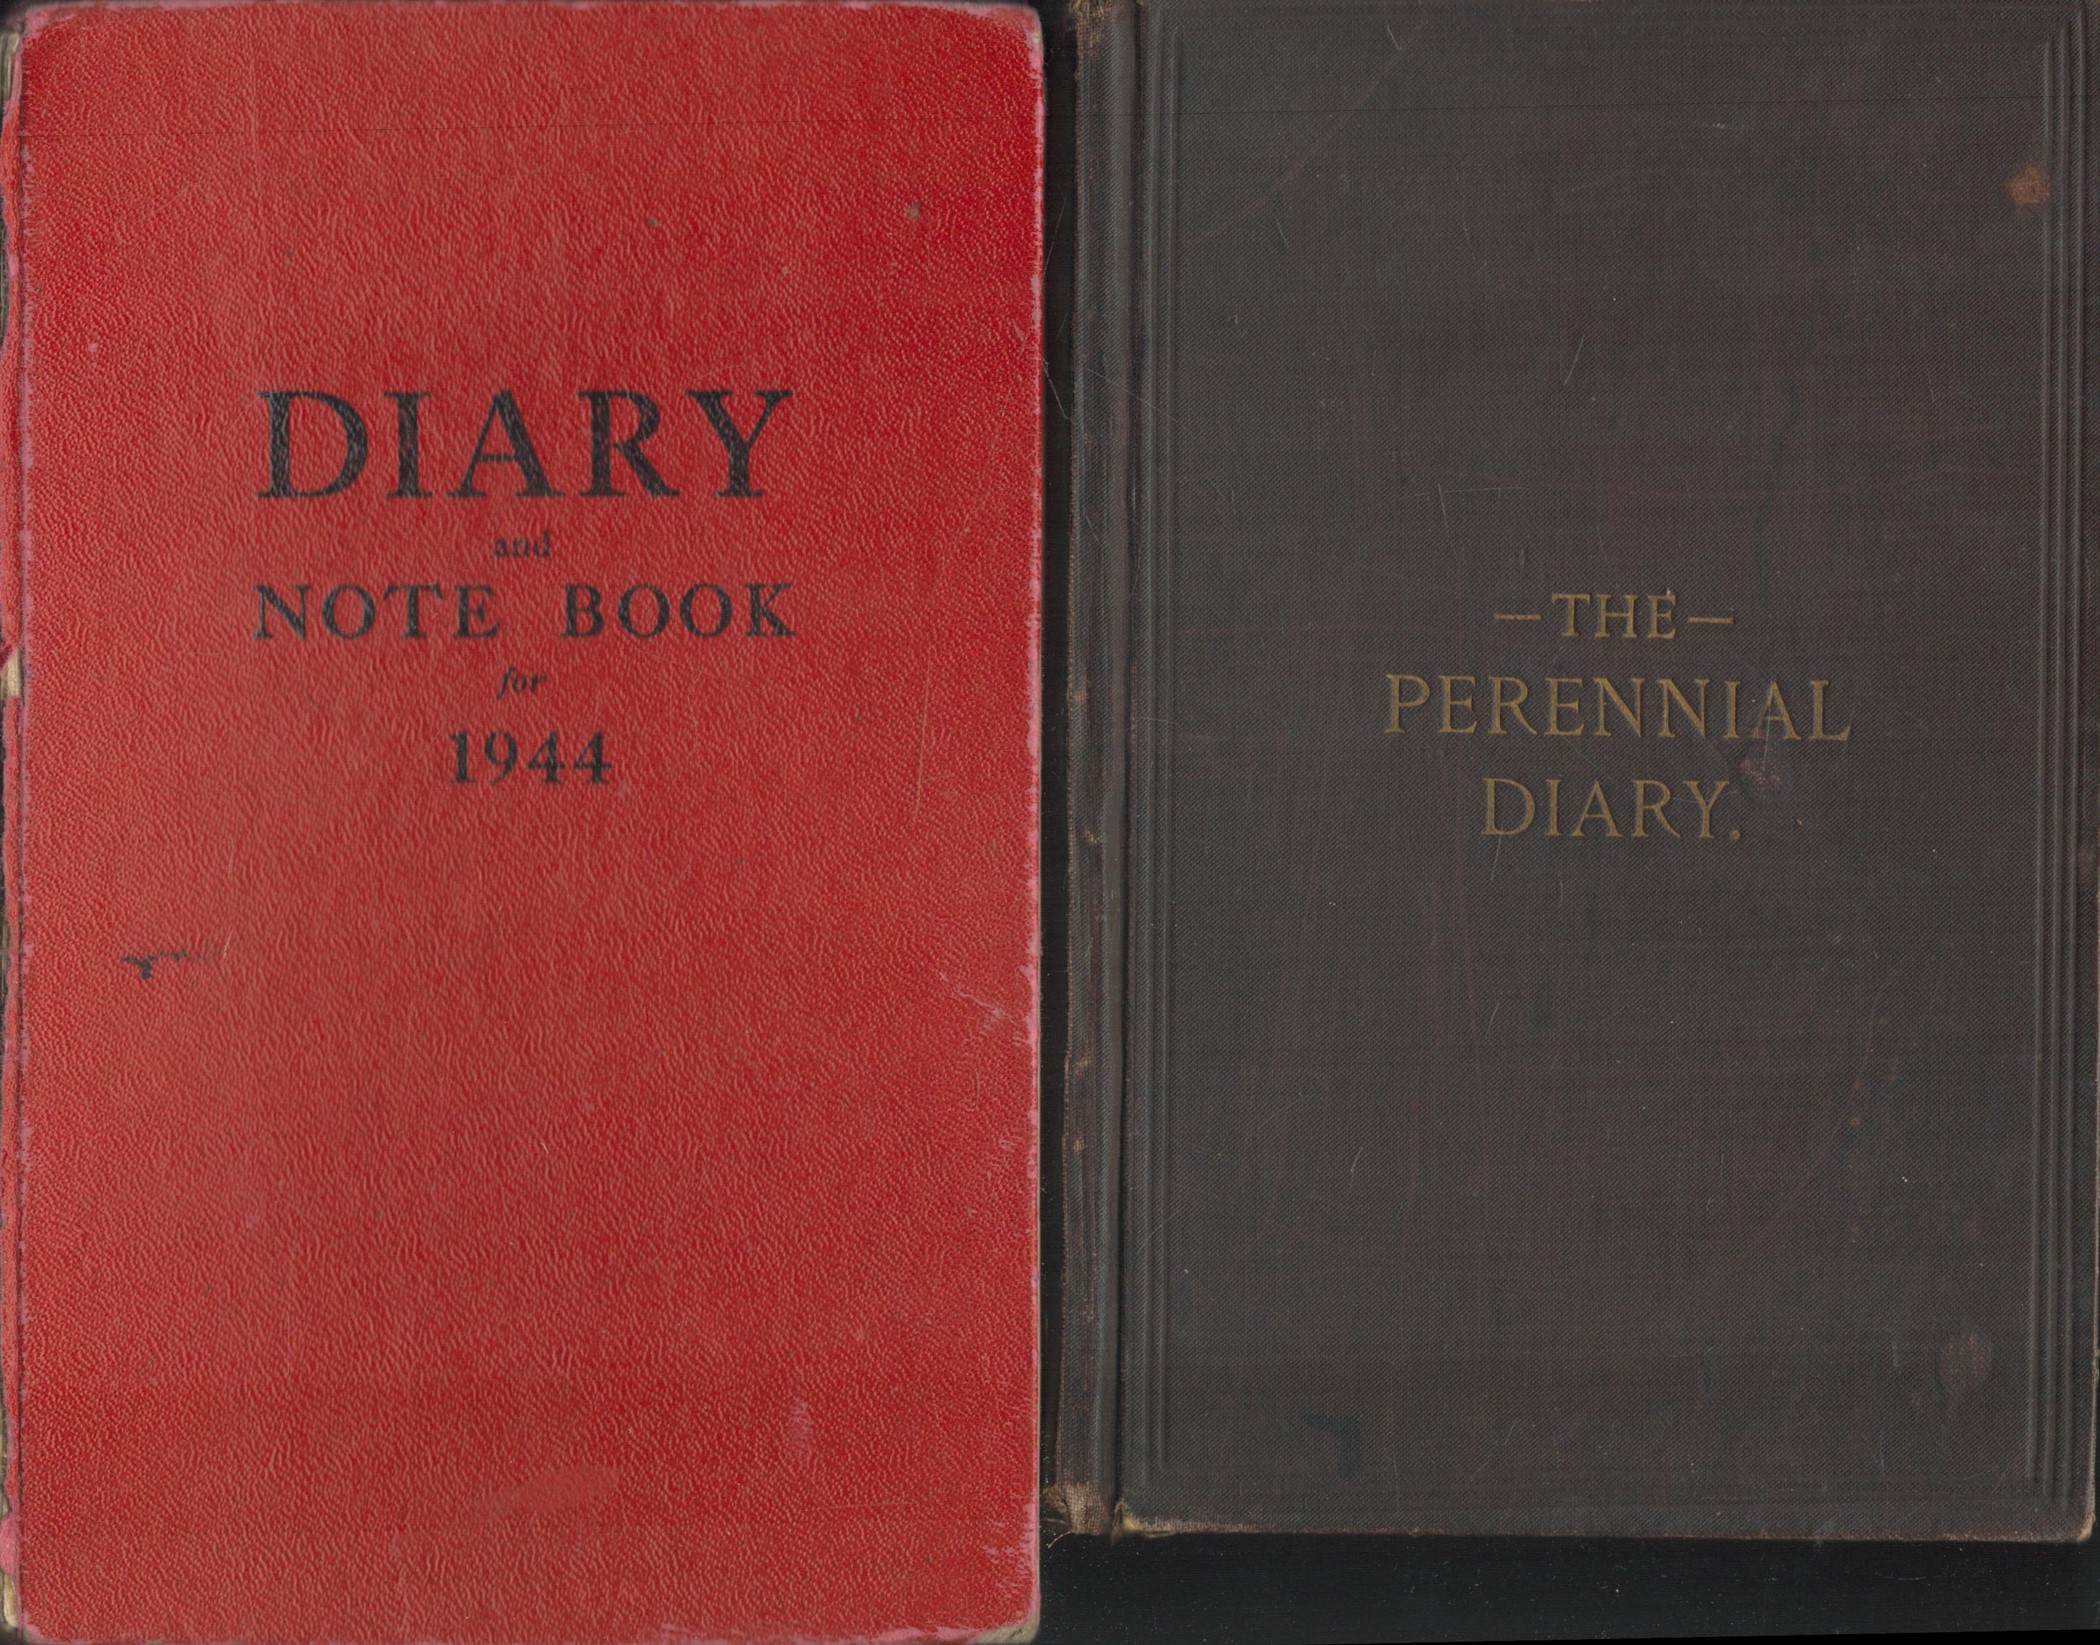 This lot contains 5 items Item 1- Diary for 1904 alliance Assurance Co Ltd. 3" x 4¼". A small